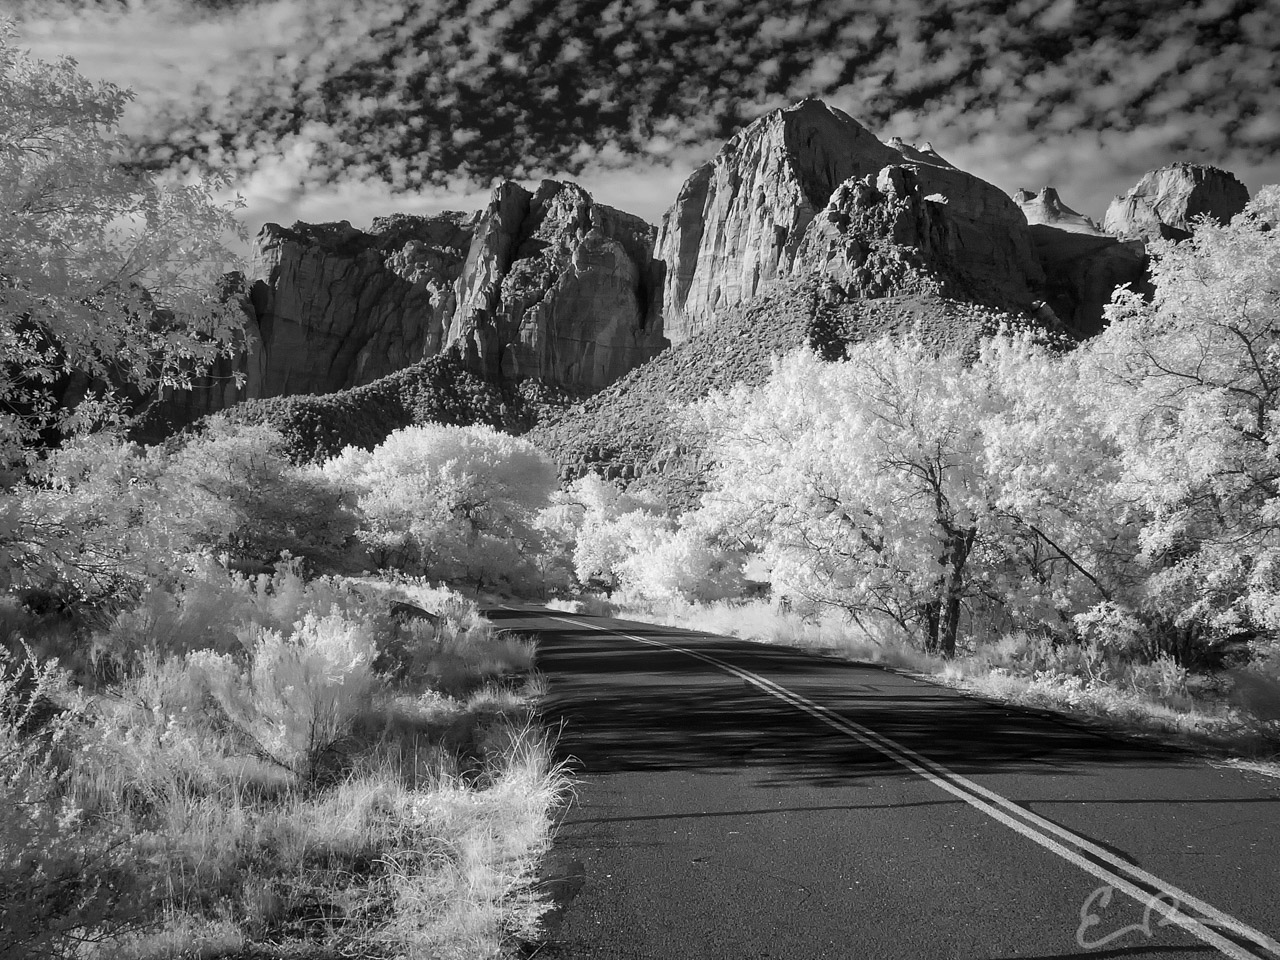 Service Road Only in Infrared